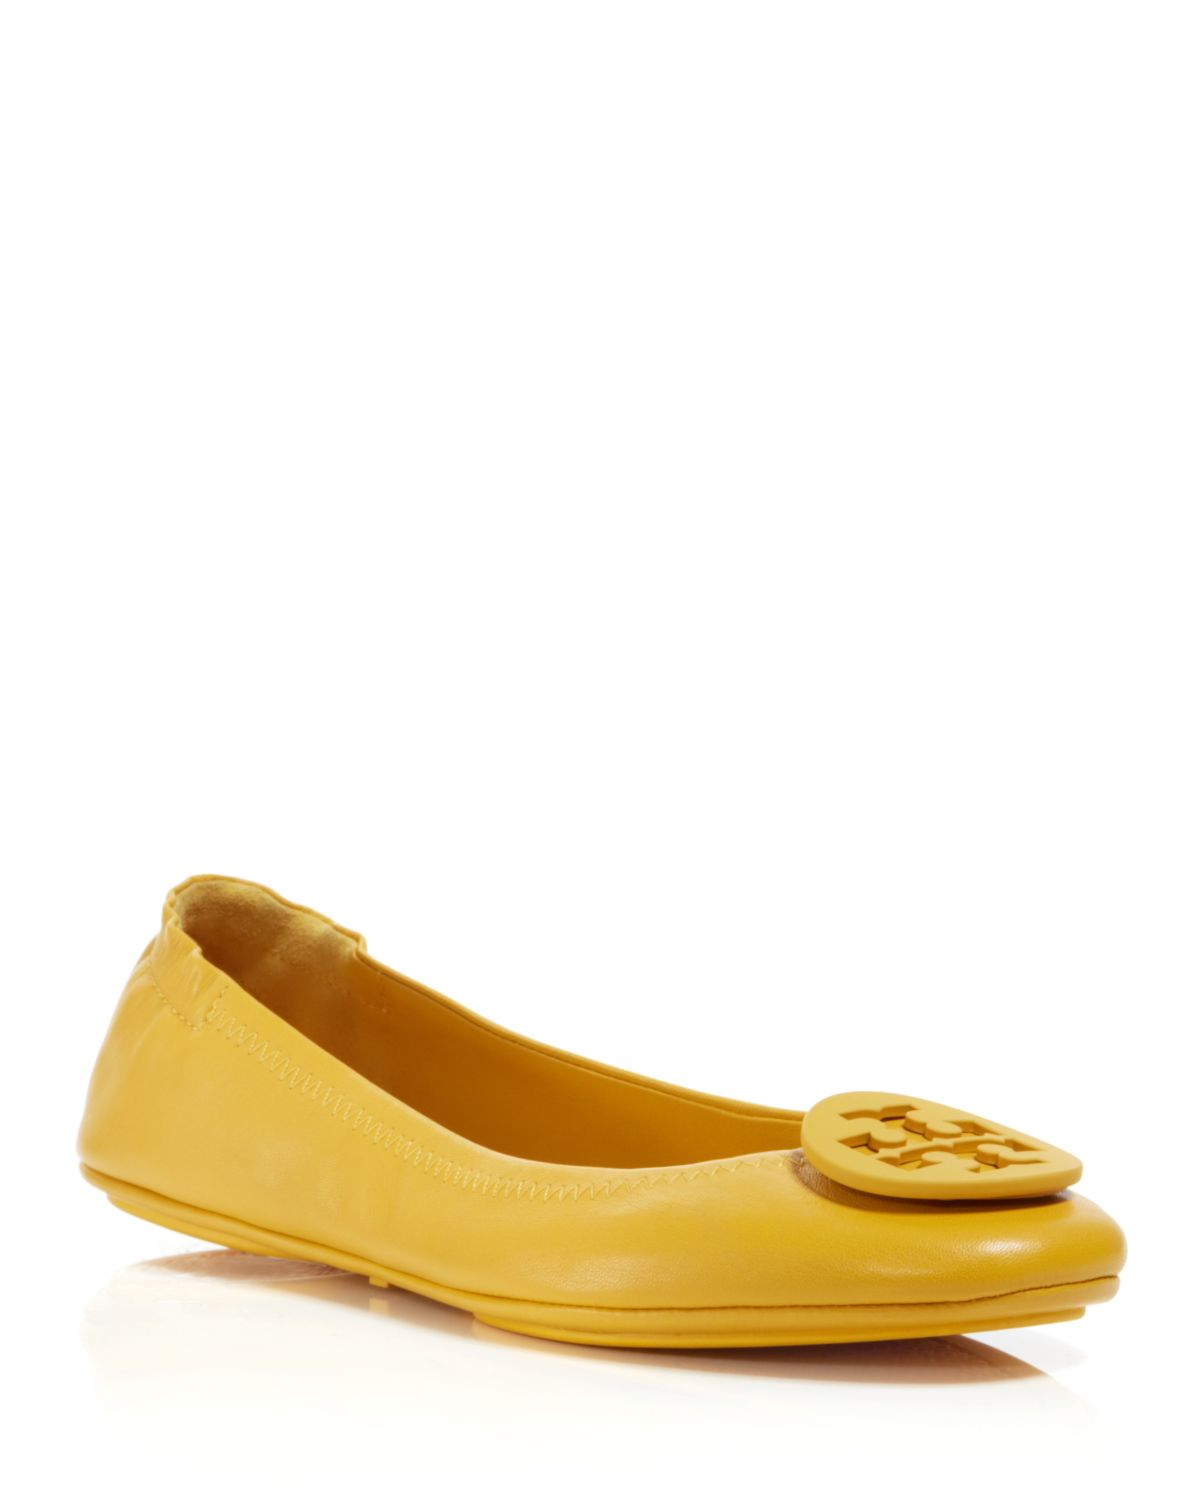 Tory Burch Ballet Flats - Minnie Travel in Yellow | Lyst